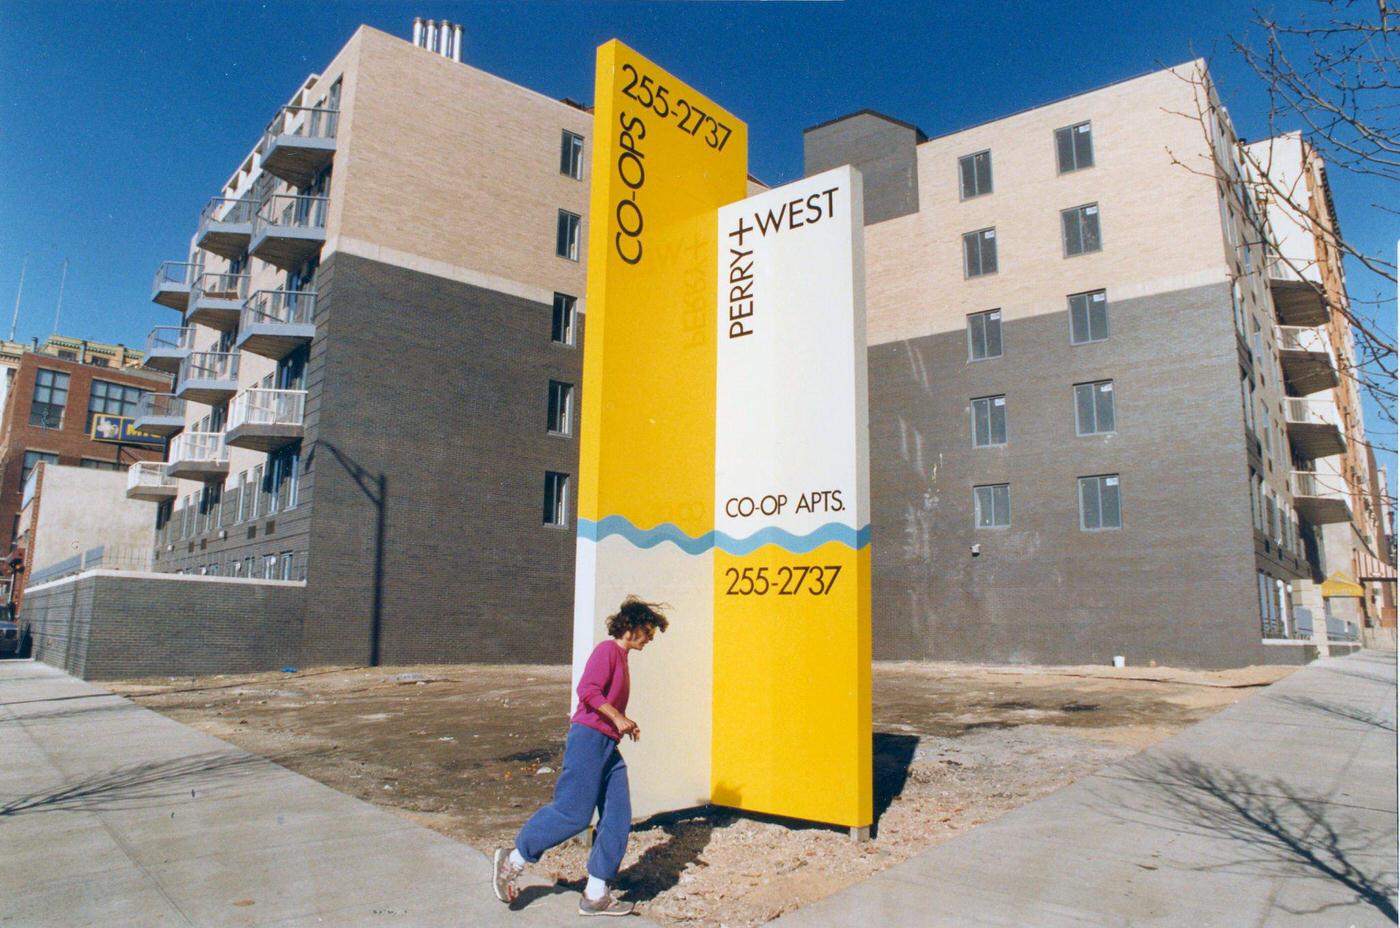 New Construction At 167 Perry St And West Sts In Greenwich Village, Manhattan, 1987